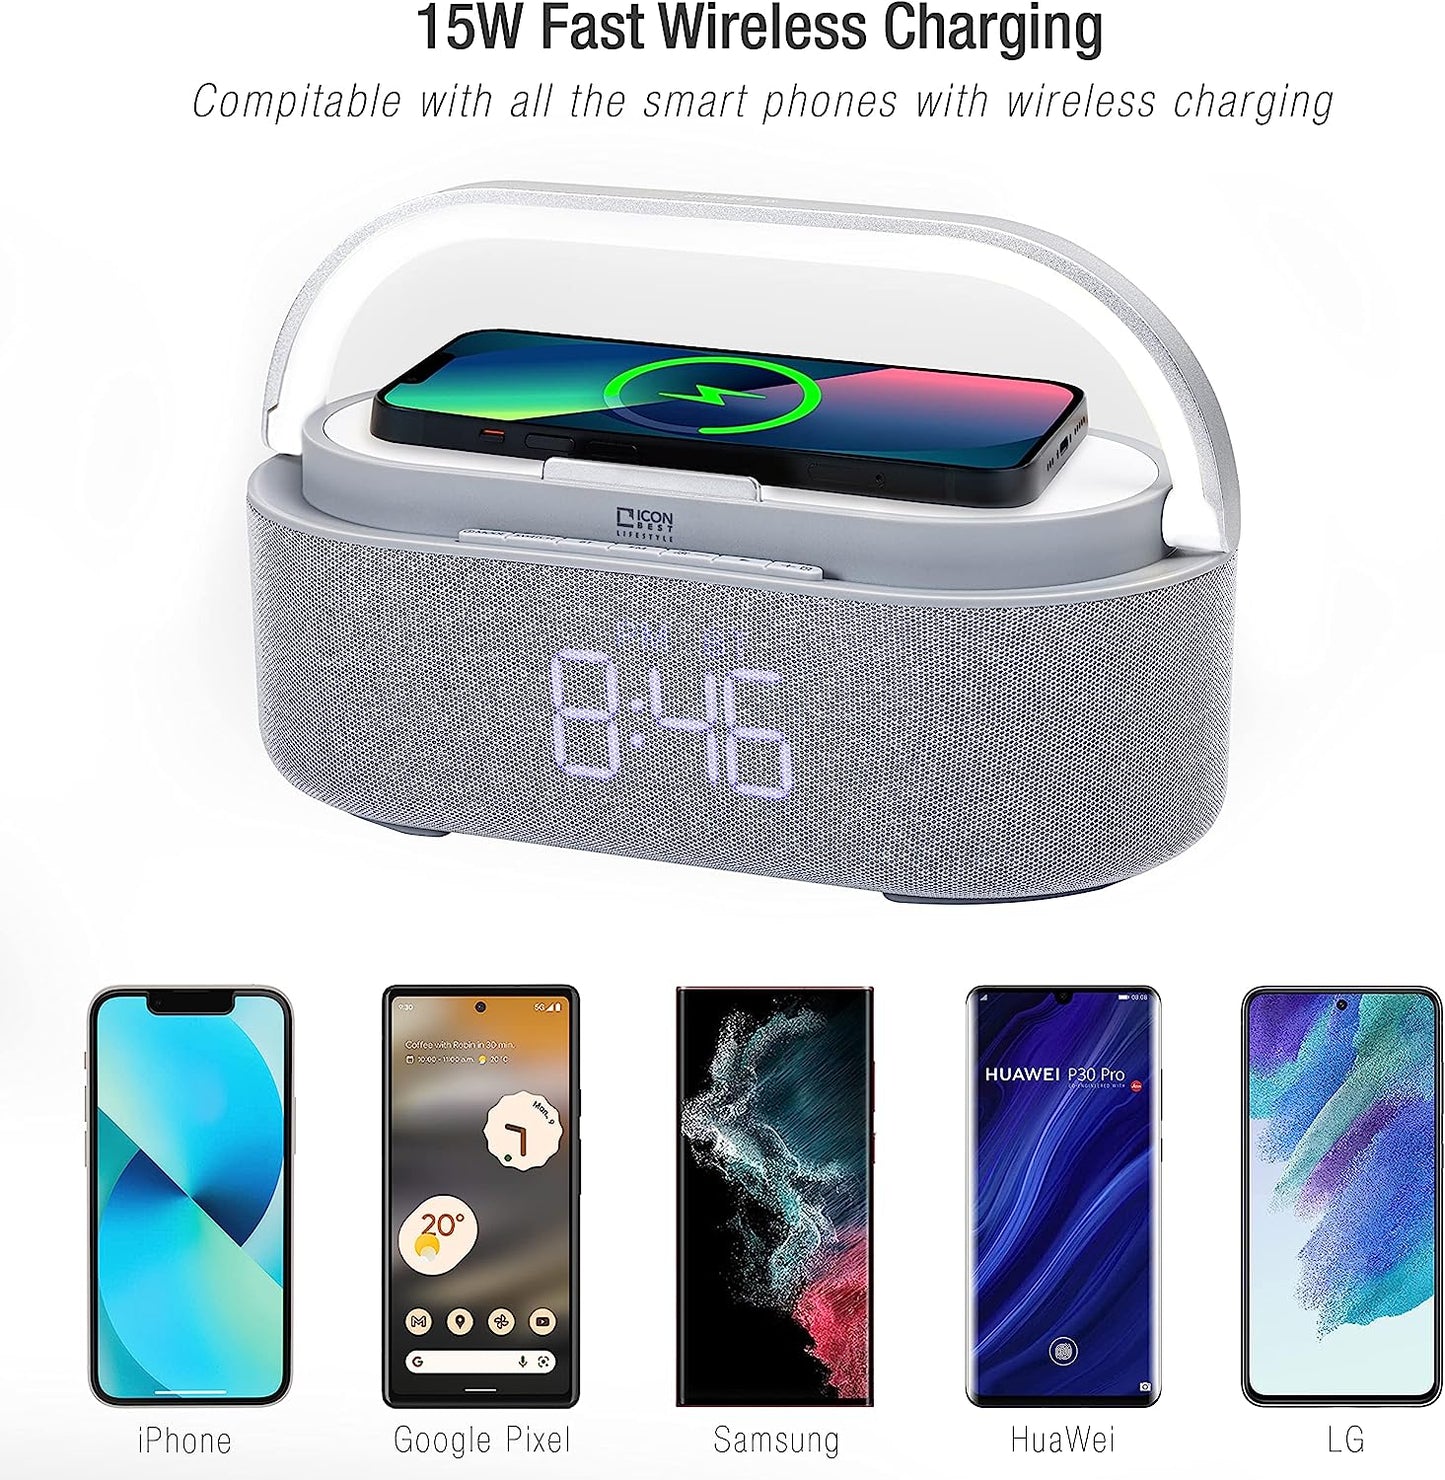 Multi-Function LED Lamp with Digital Alarm Clock, Qi Wireless Charging Pad, Speaker, FM Radio, Touch Control